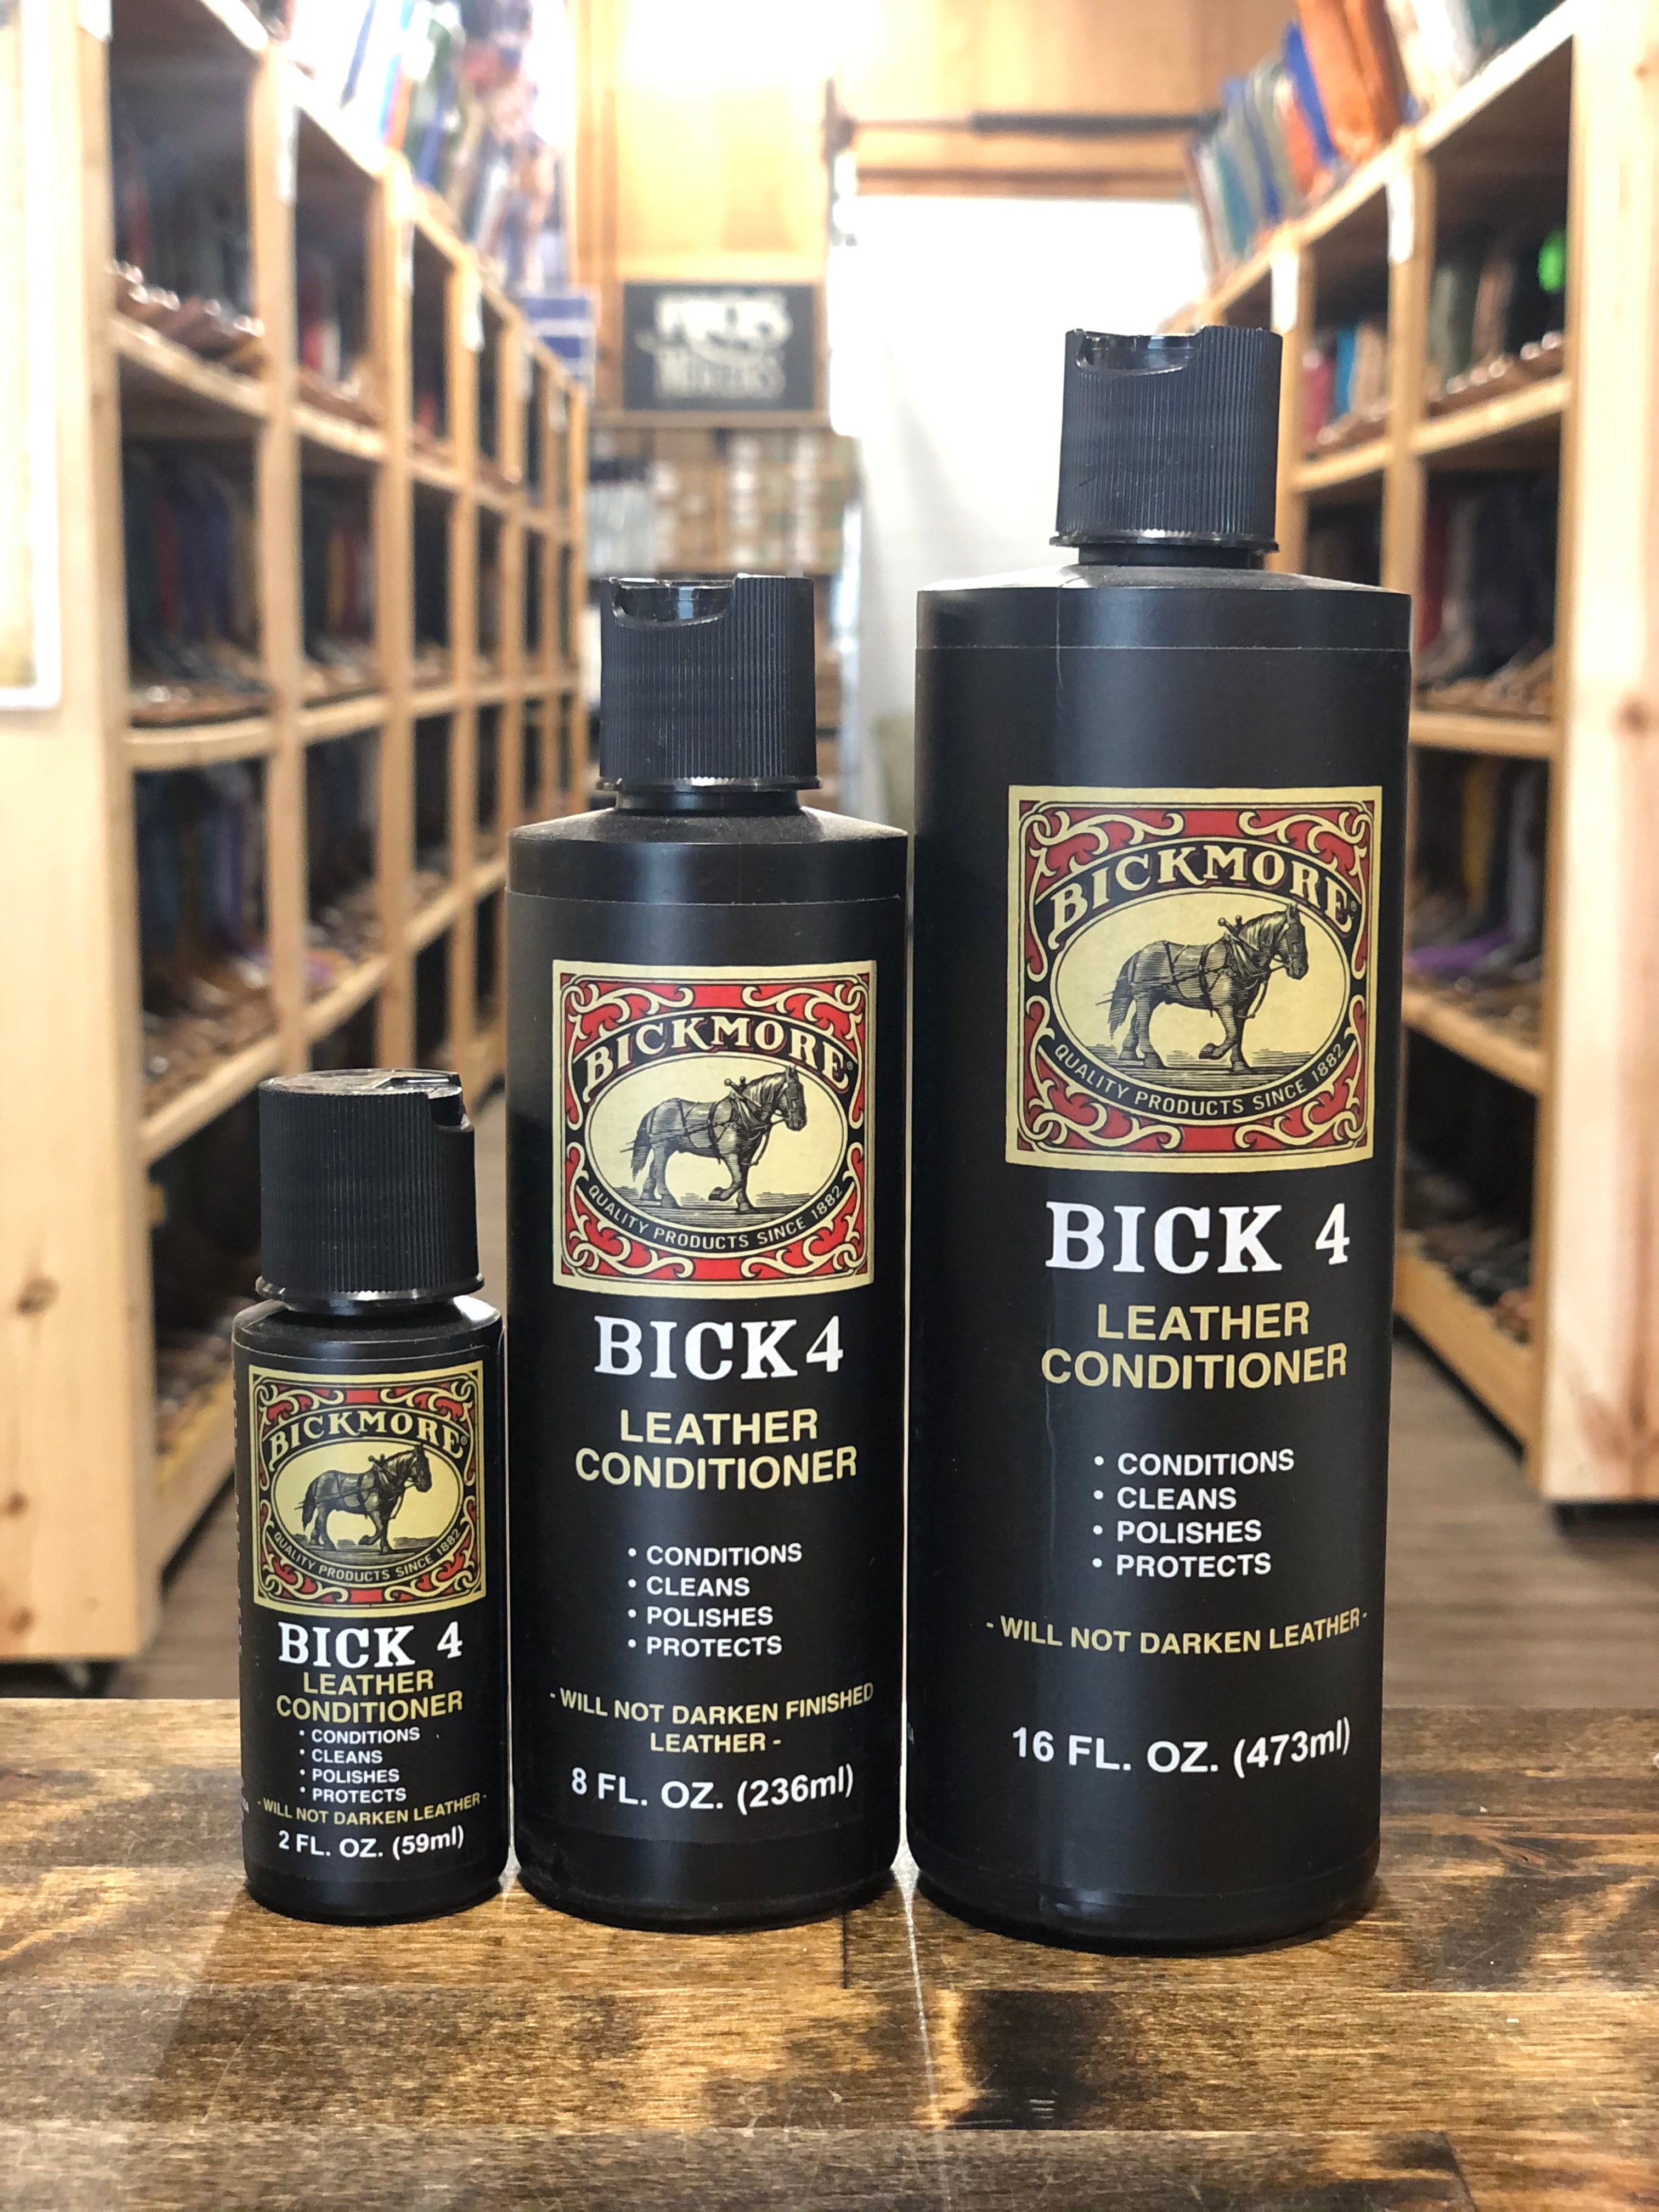 Bick 4 Leather Conditioner Review: My Thoughts After Using